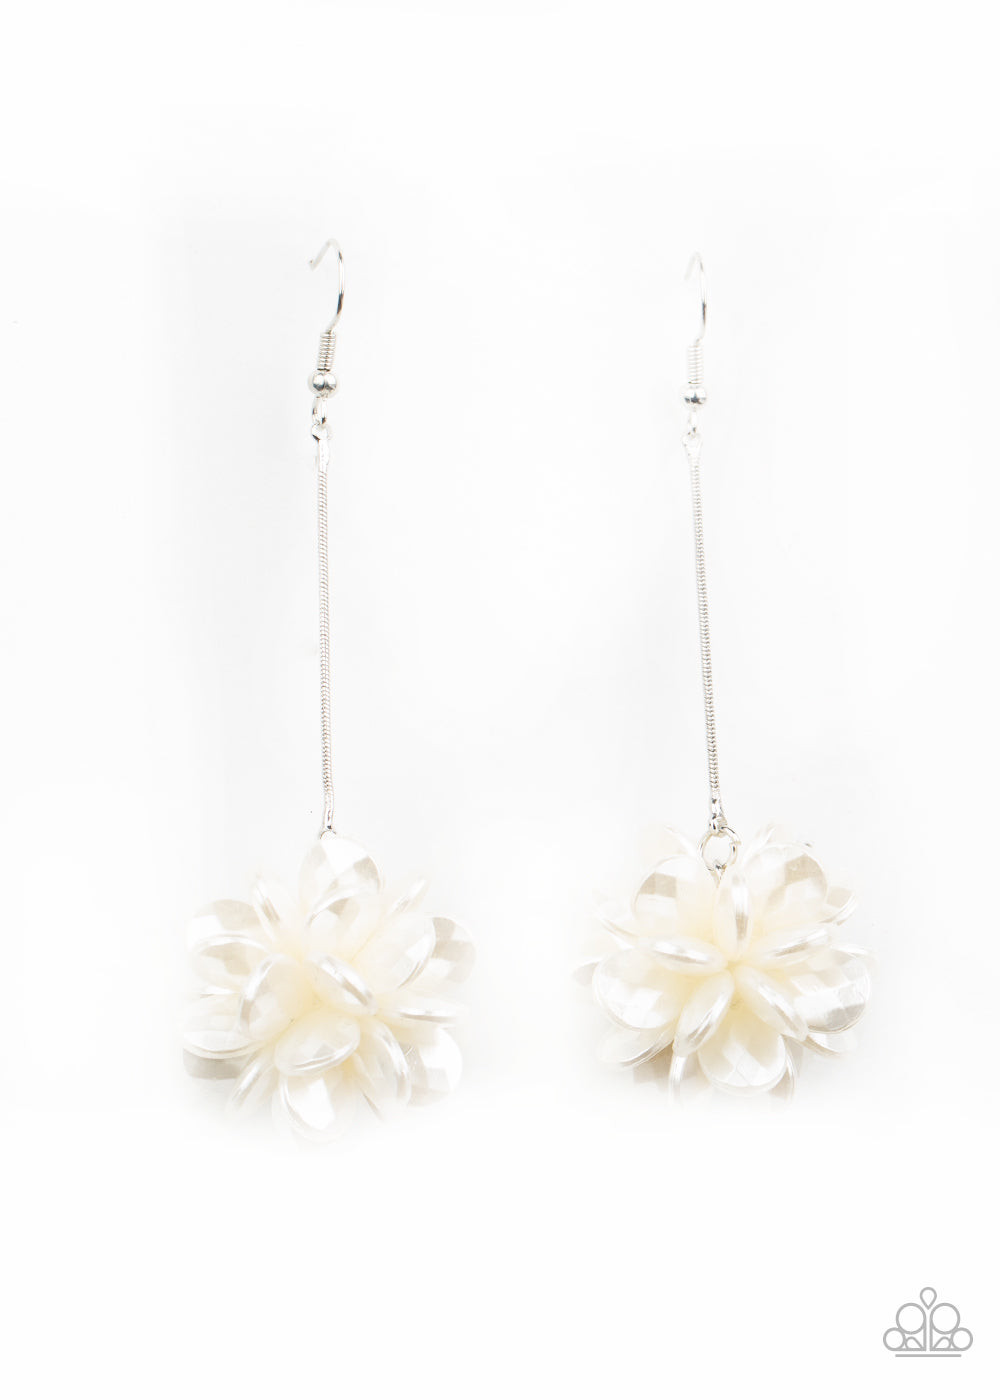 Paparazzi Swing Big Earrings - January 2021 Life Of The Party Exclusive - A Finishing Touch 